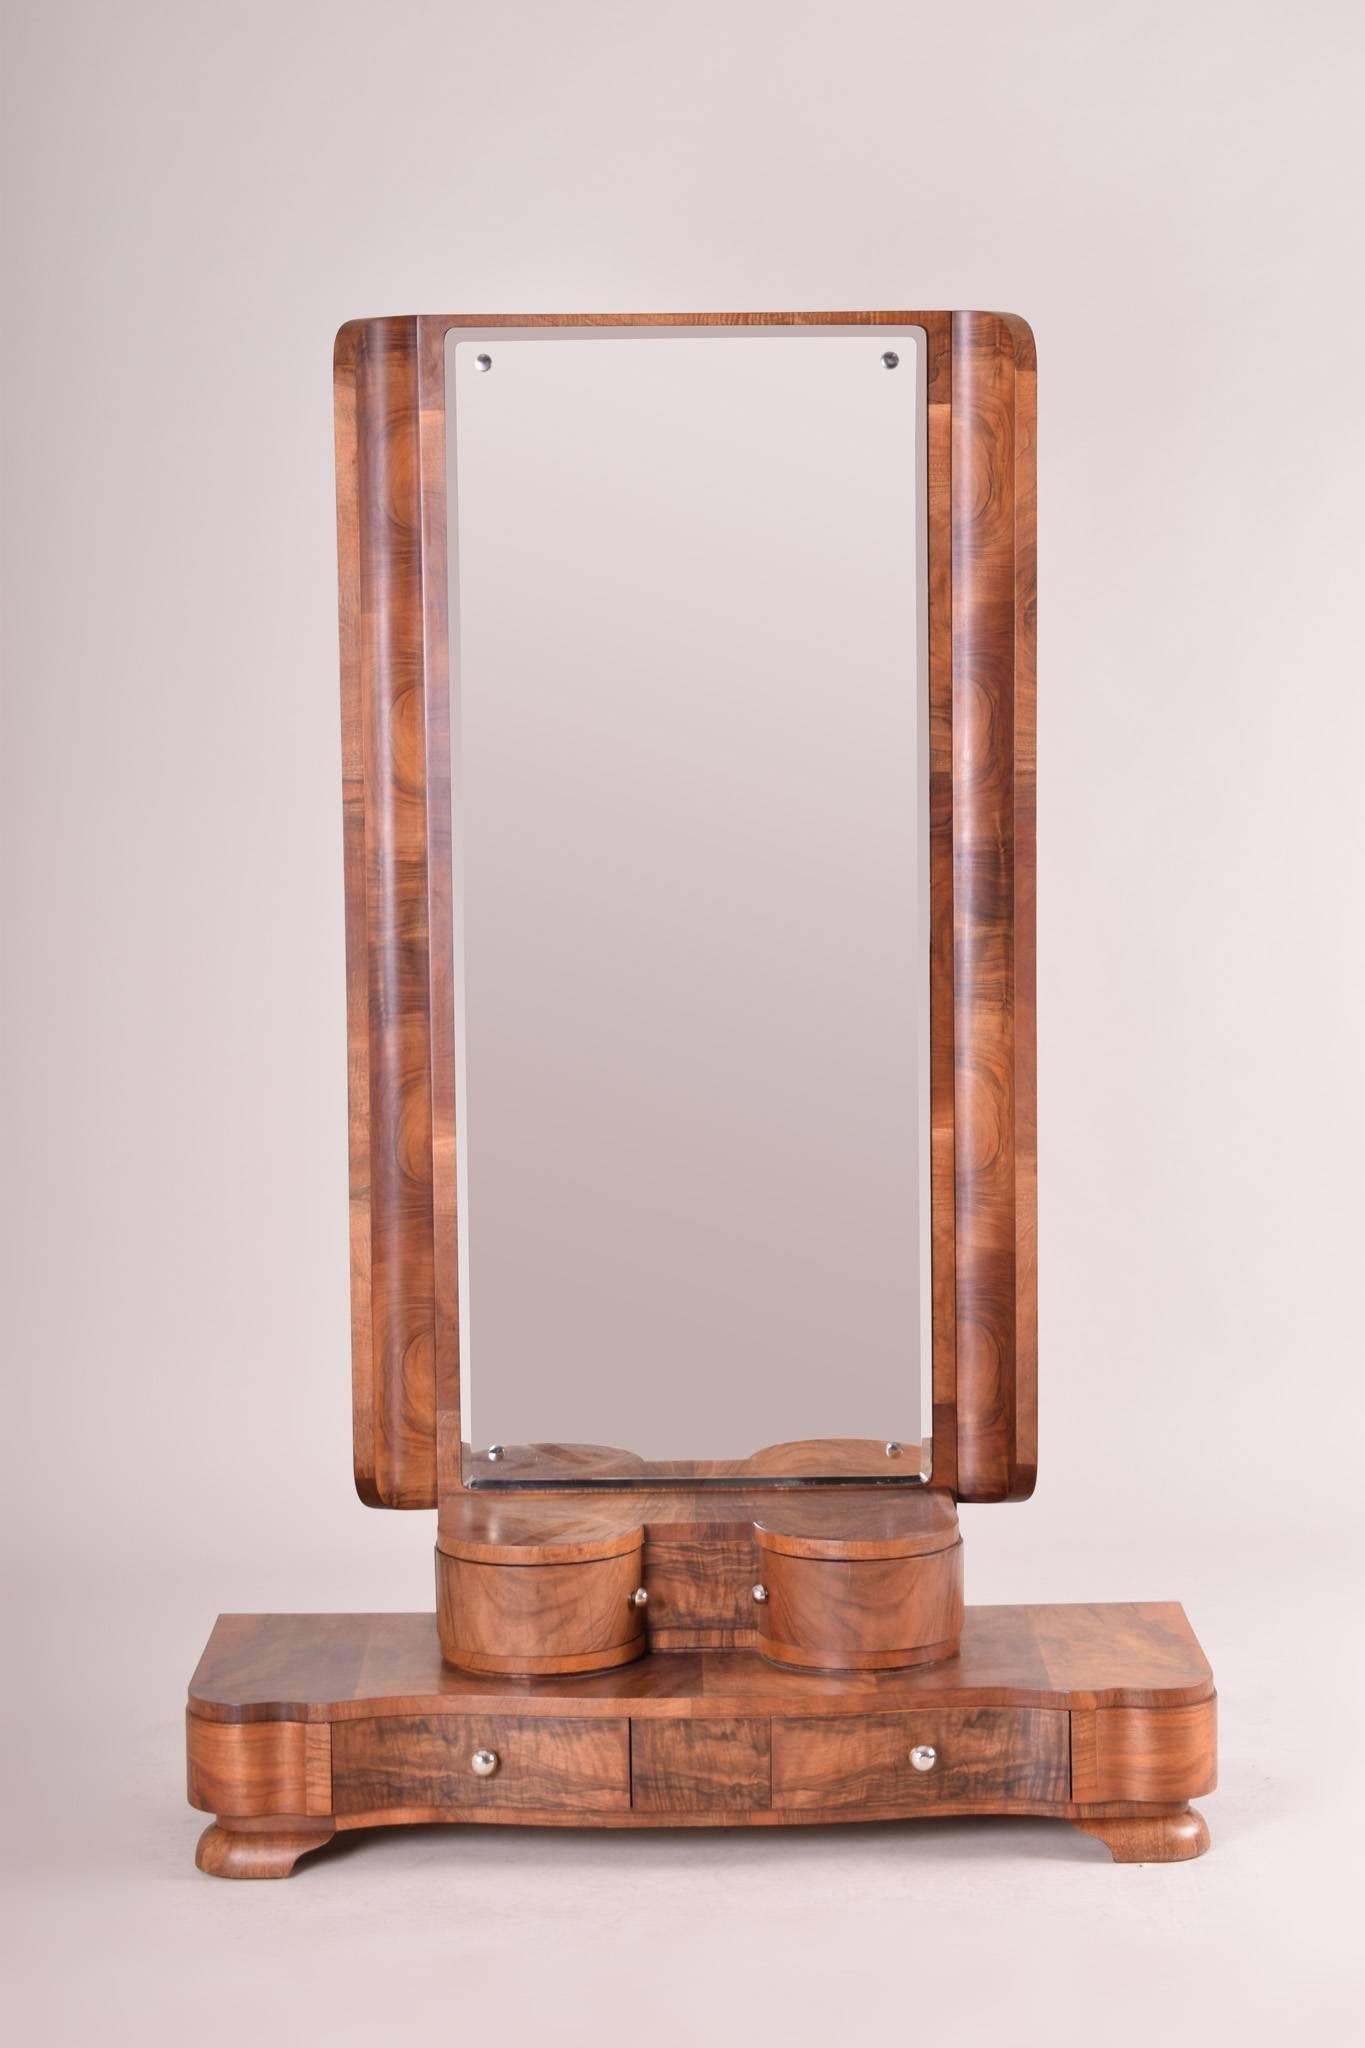 Art Deco mirror
Period: 1920-1929. 
Material: Palisander. 
Completely restored and the surface was made by lacquers to the half matt.